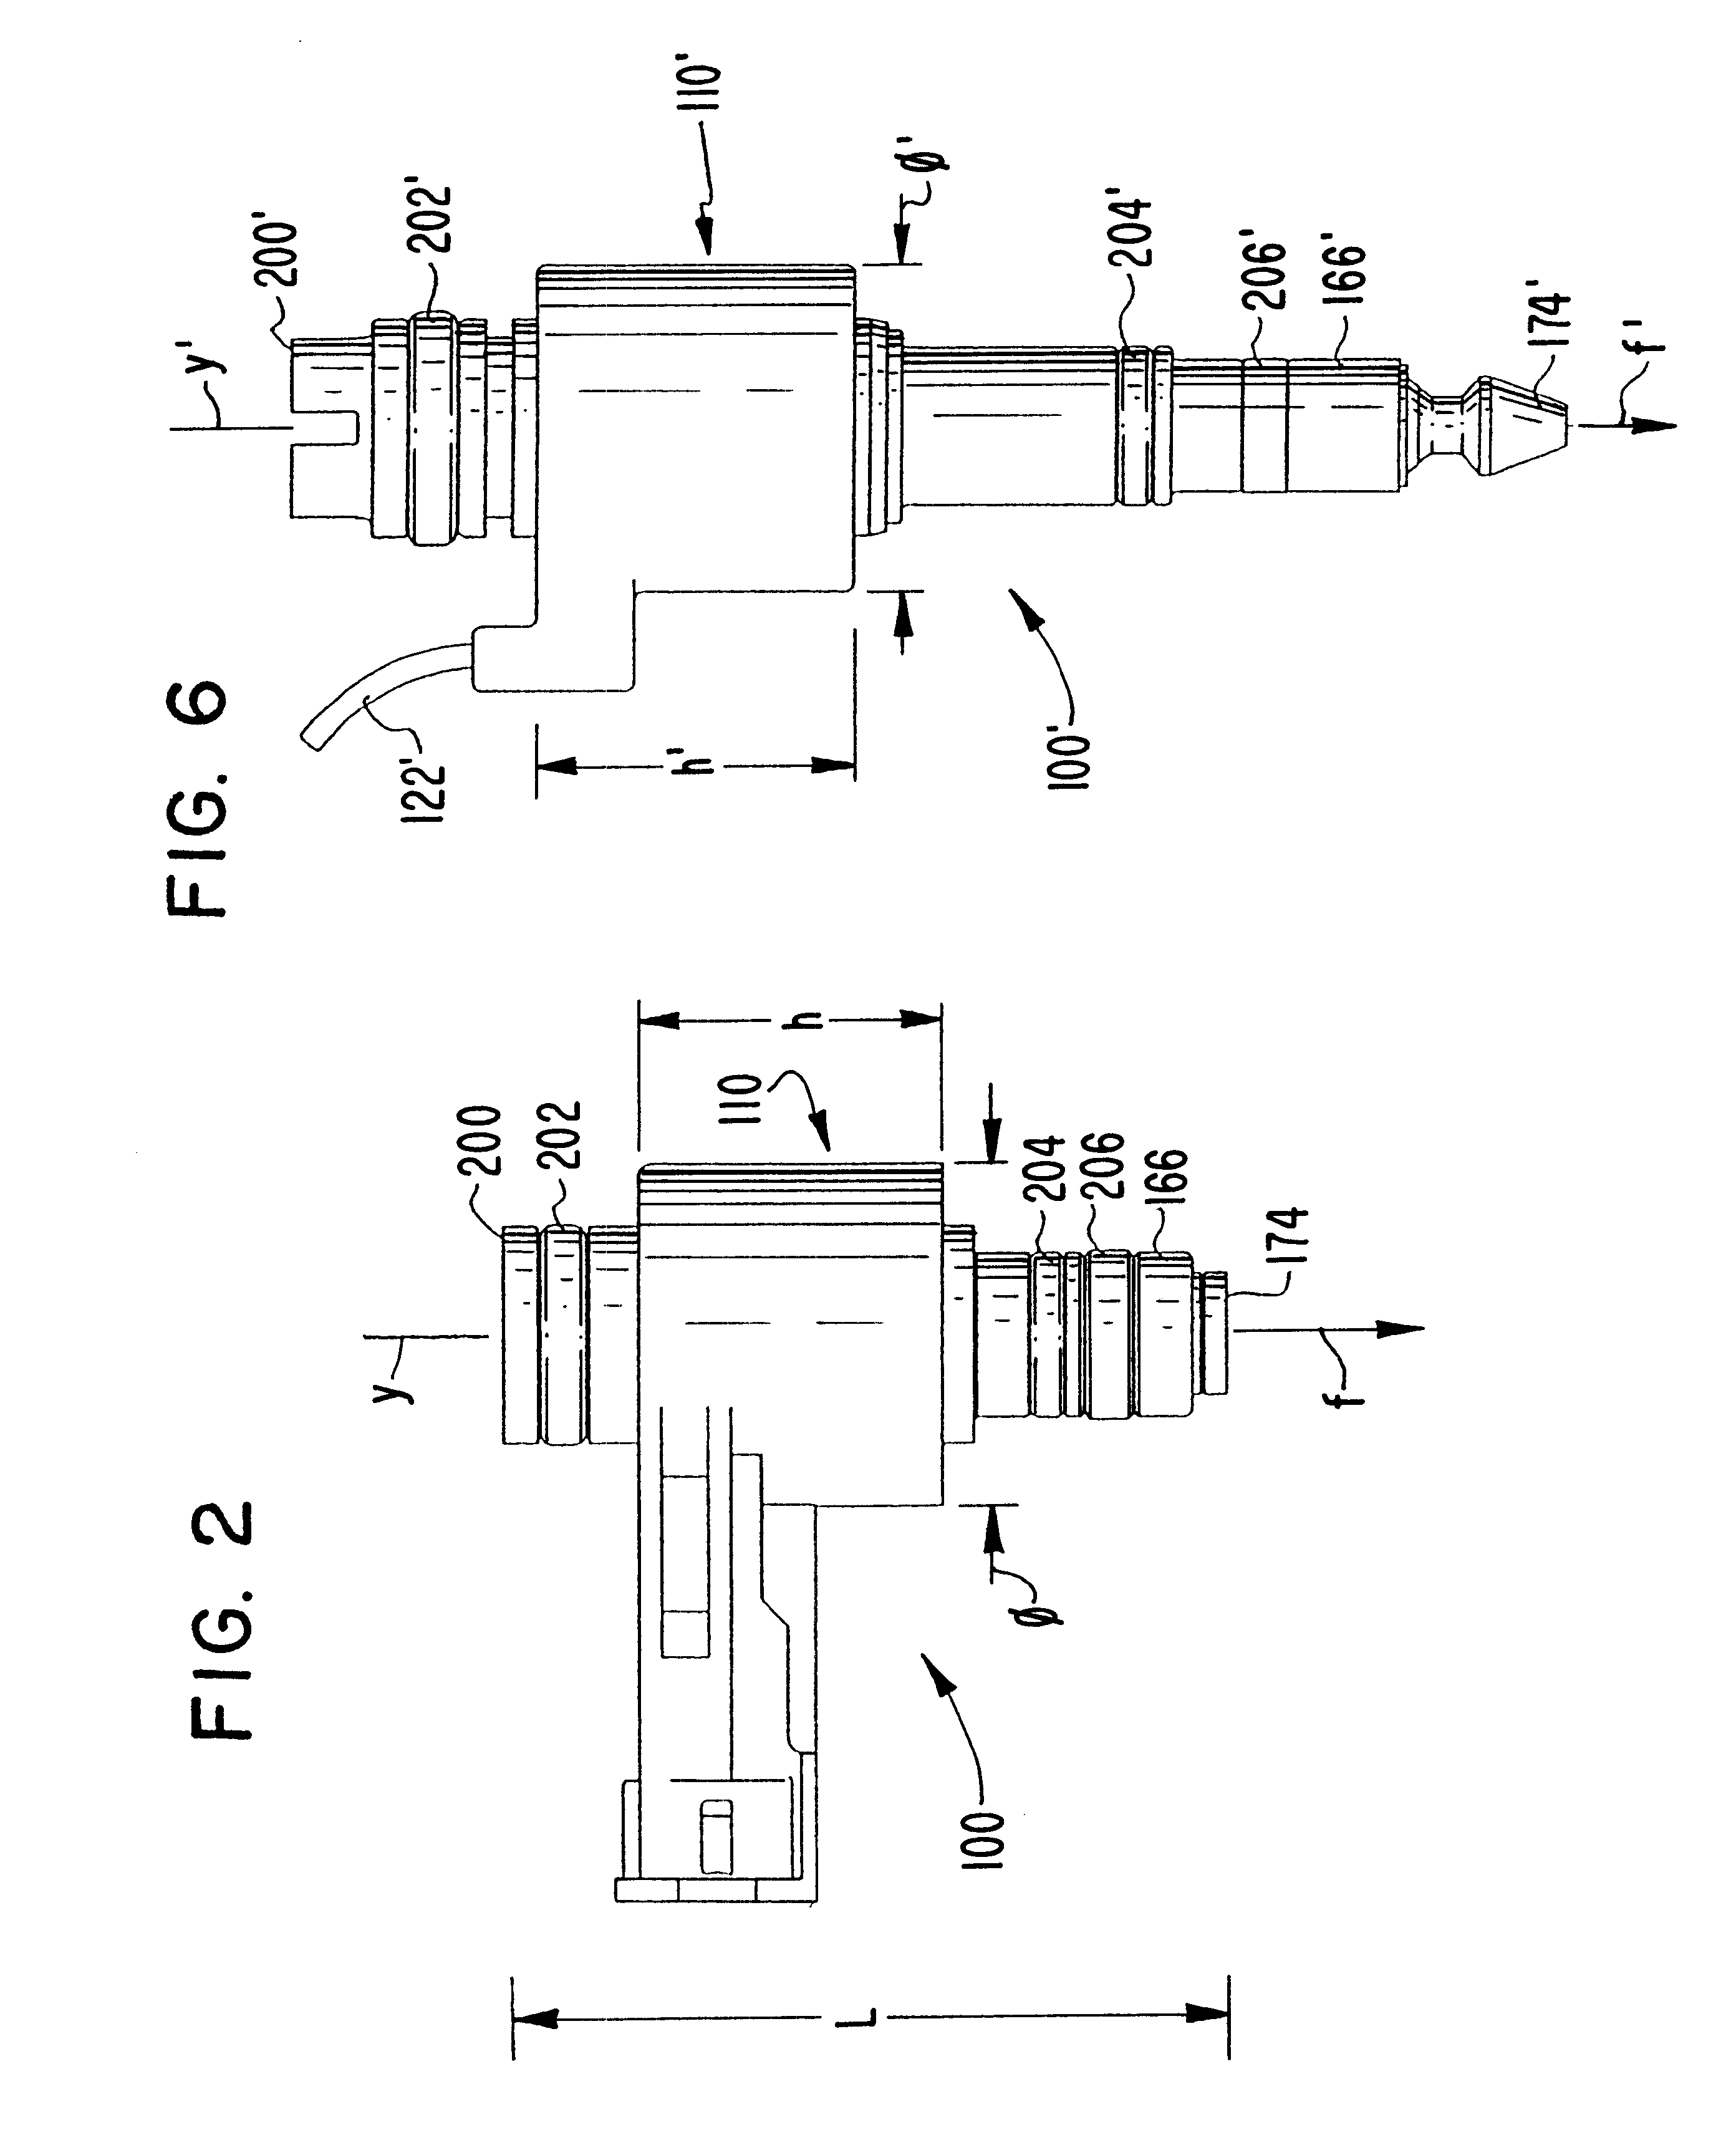 Air assist fuel injectors and method of assembling air assist fuel injectors